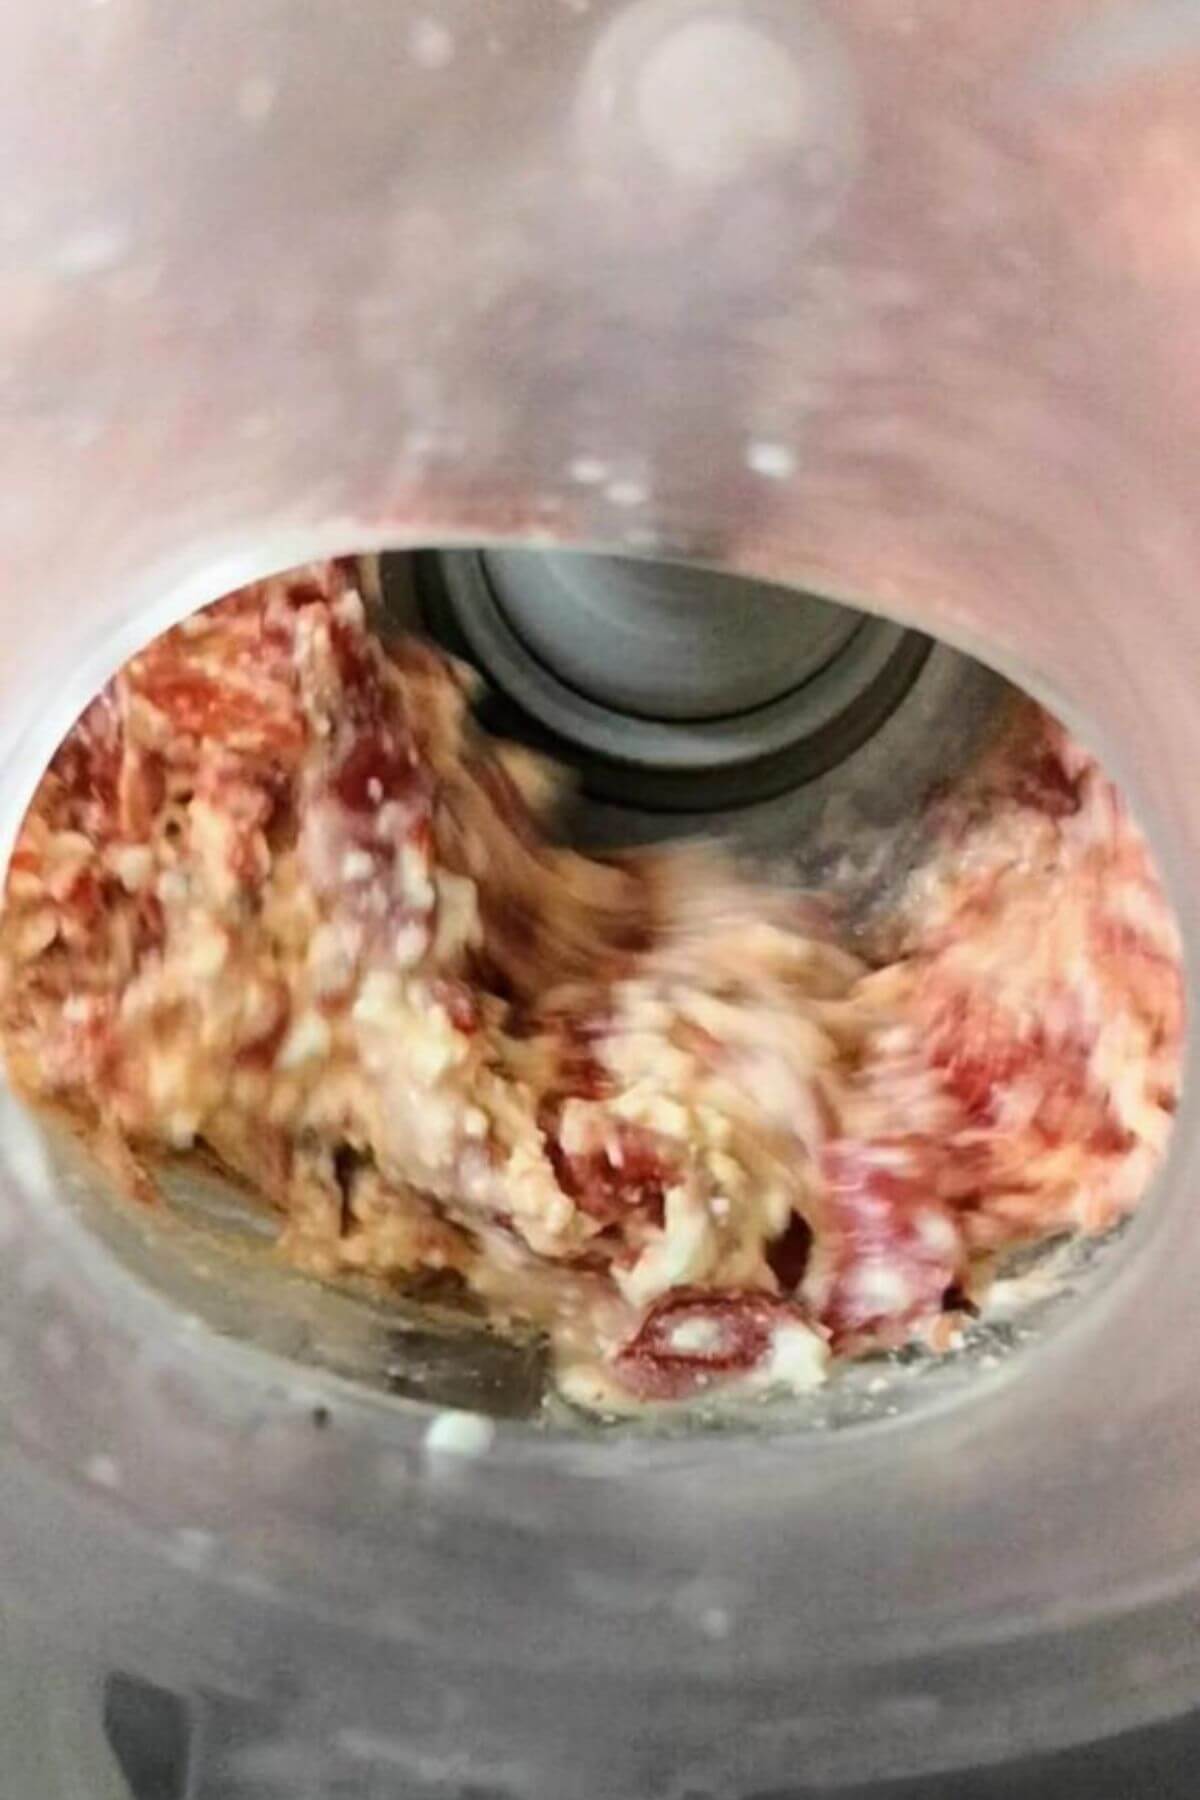 Blended up red pepper, feta, olive oil and lemon juice looking down into the bowl of a food processor from above